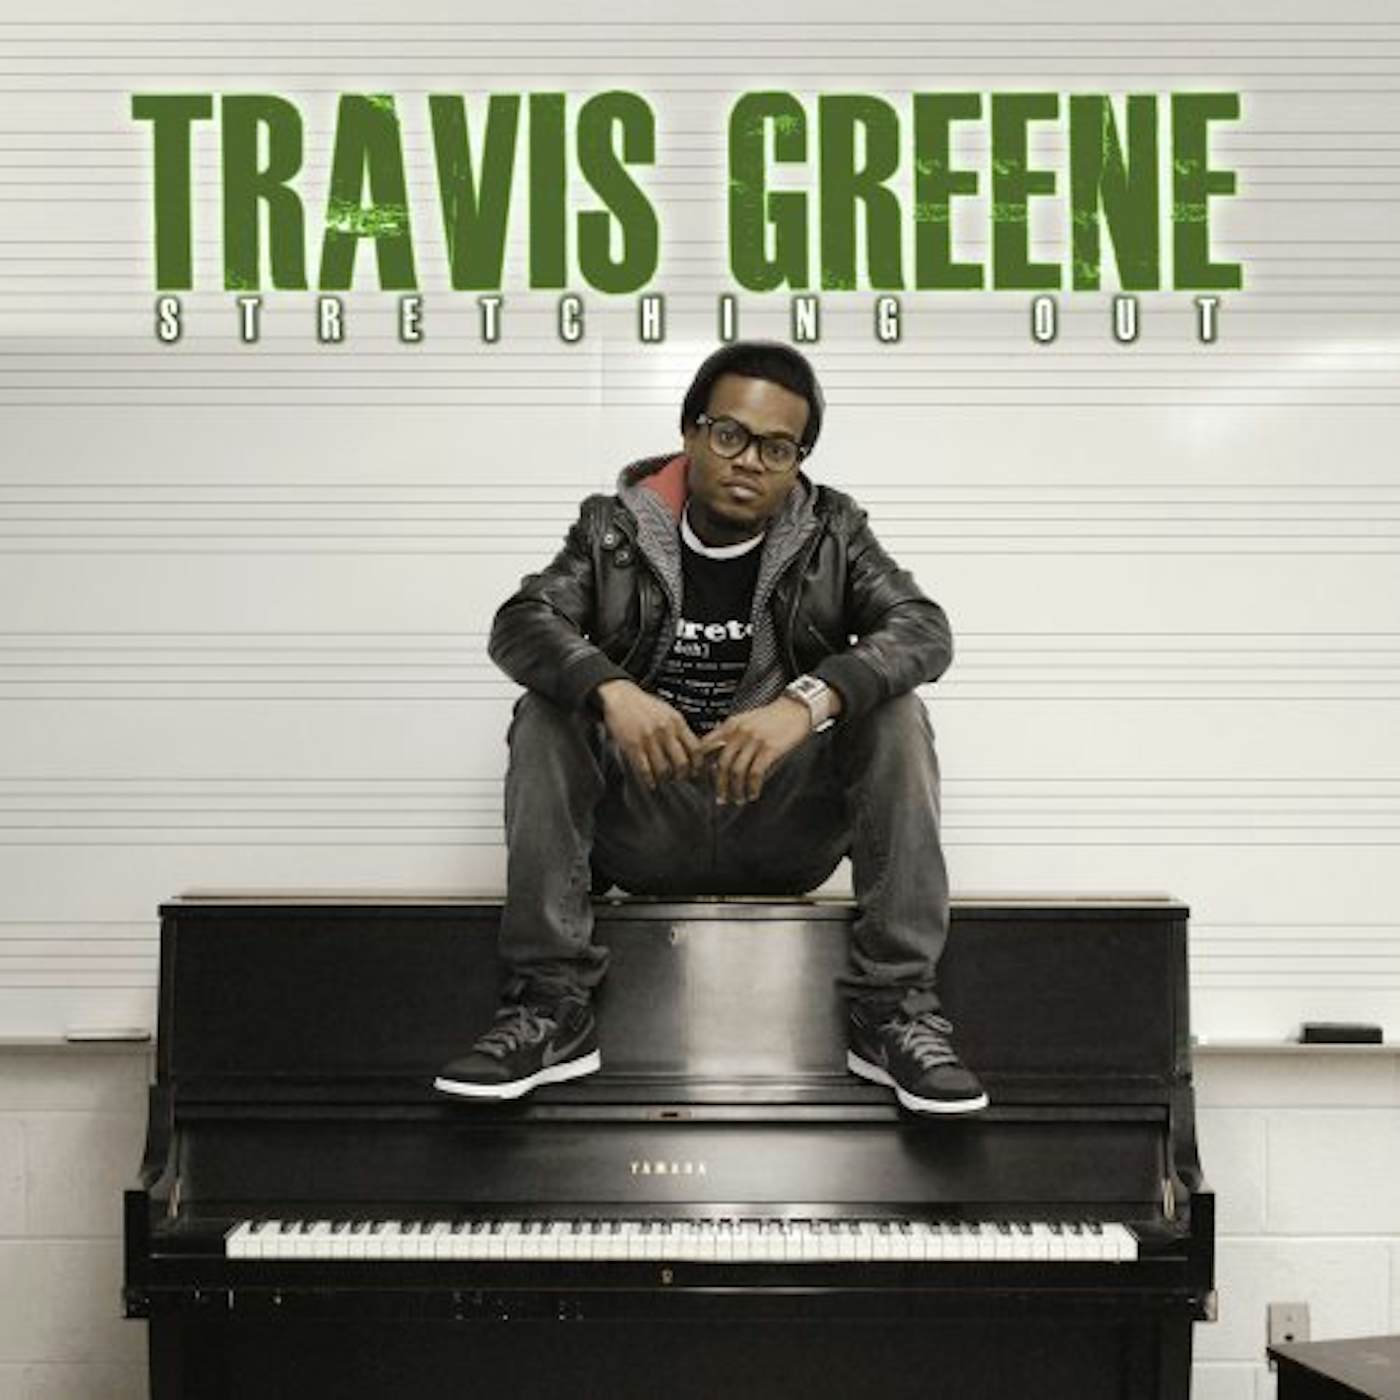 Travis Greene STRETCHING OUT CD